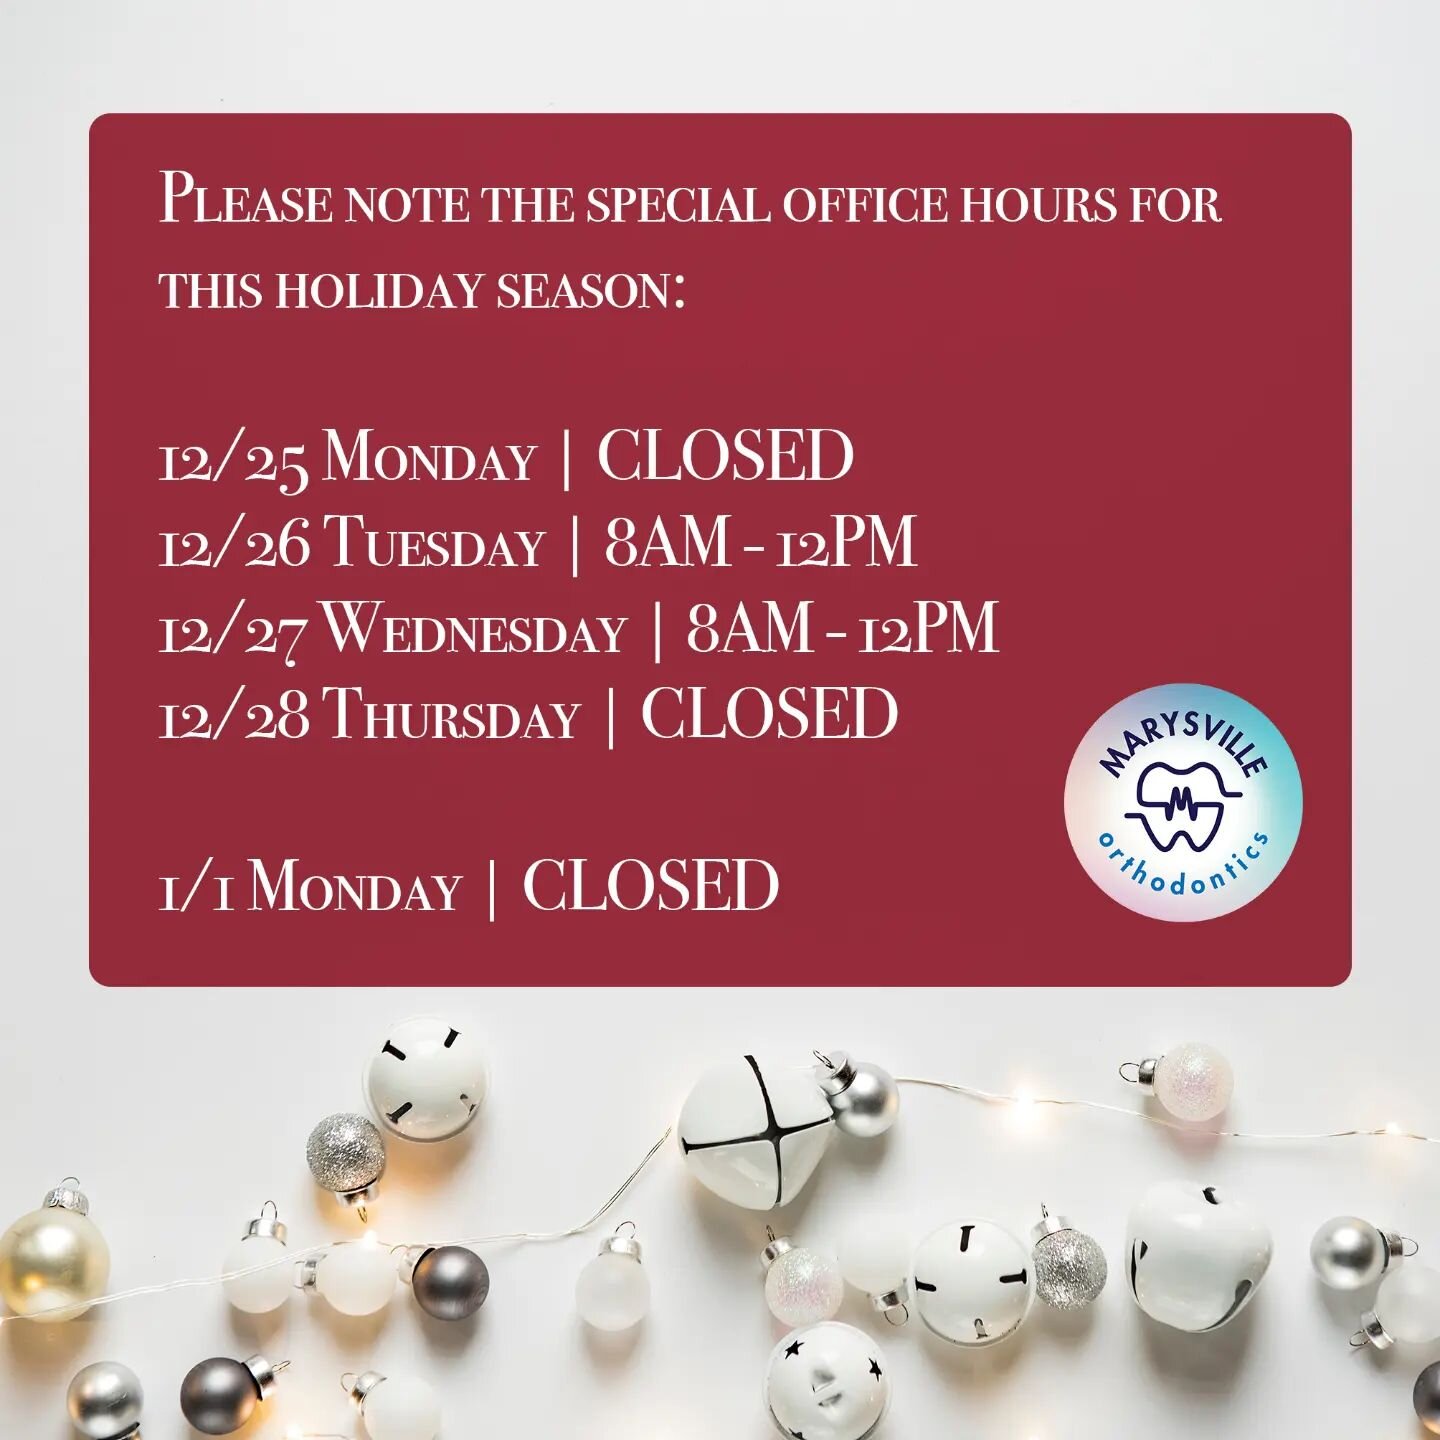 Thank you to our patients and families for another wonderful year! 🙌🏻
❄️
If you have any orthodontic troubles, please call our office during these hours so a team member can assist you.
❄️
Happy Holidays! 🎁🎄❄️❤️💚
❄️
#marysville #marysvilleorthod